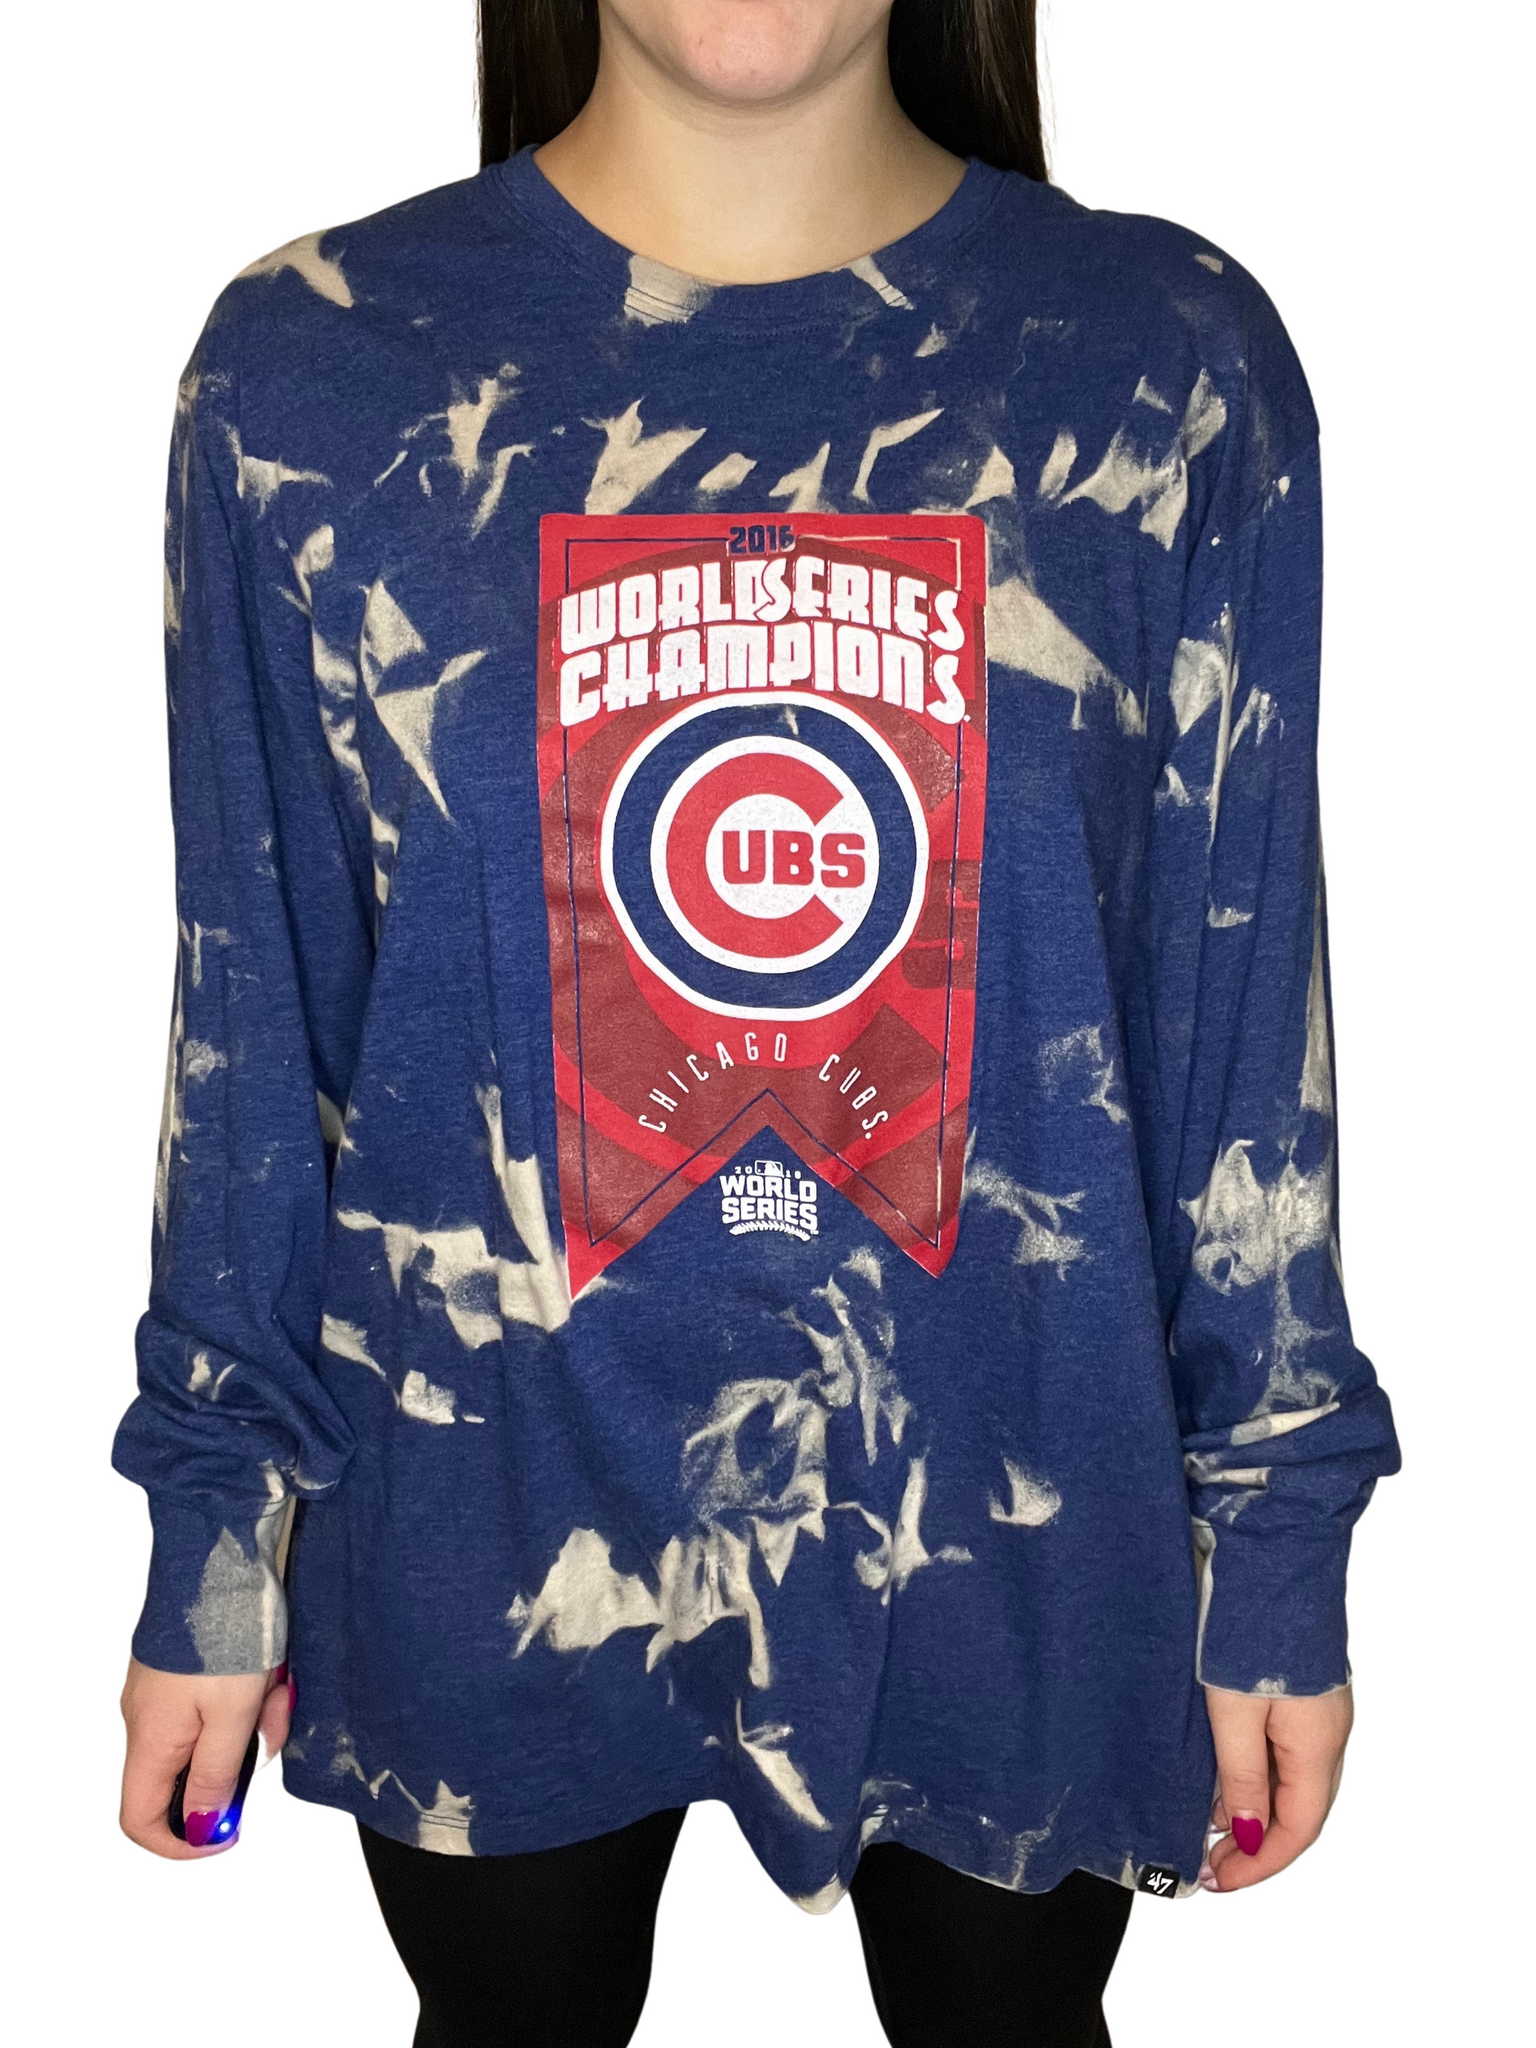 Chicago Cubs Fanatics Branded High Whip Pitcher Long Sleeve T-Shirt - Black